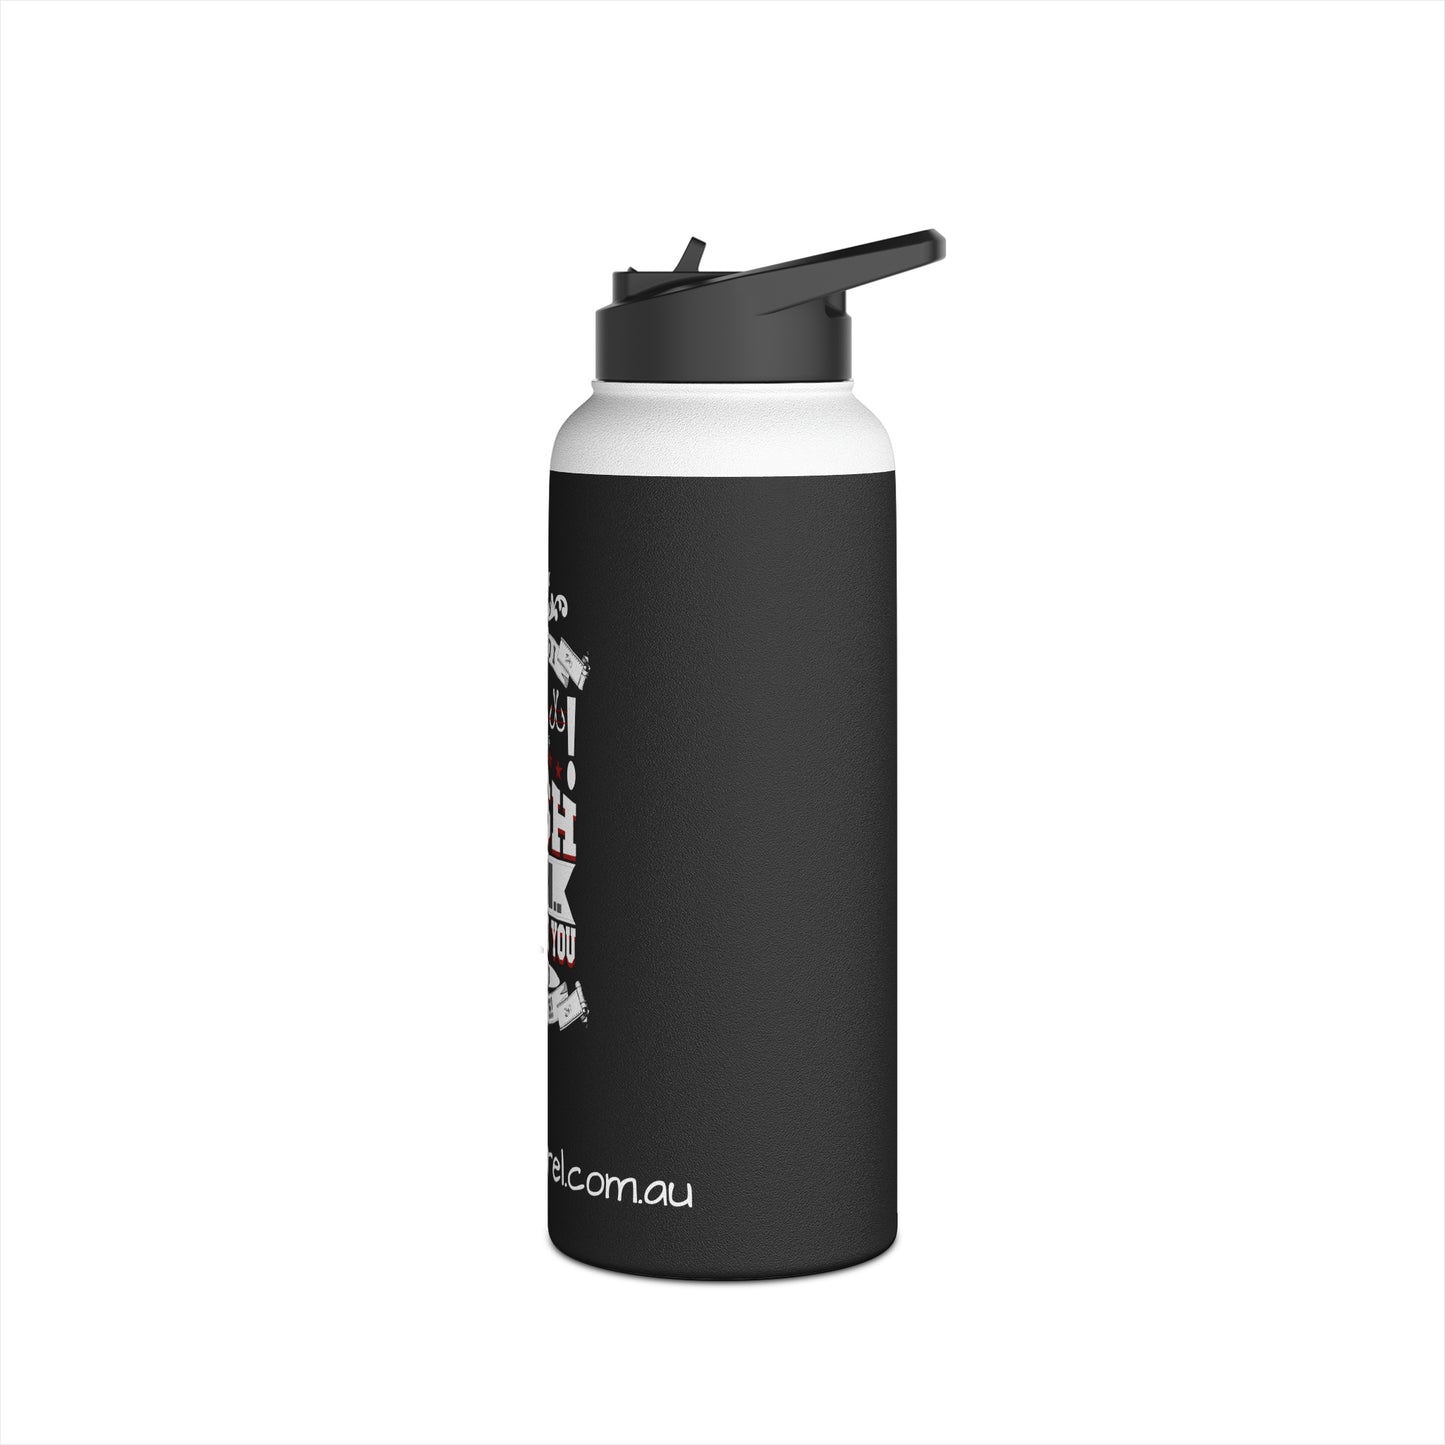 Stainless Steel Water Bottle - Why Do I Fish? UUHH... Did I Ask Why Do You Breathe??